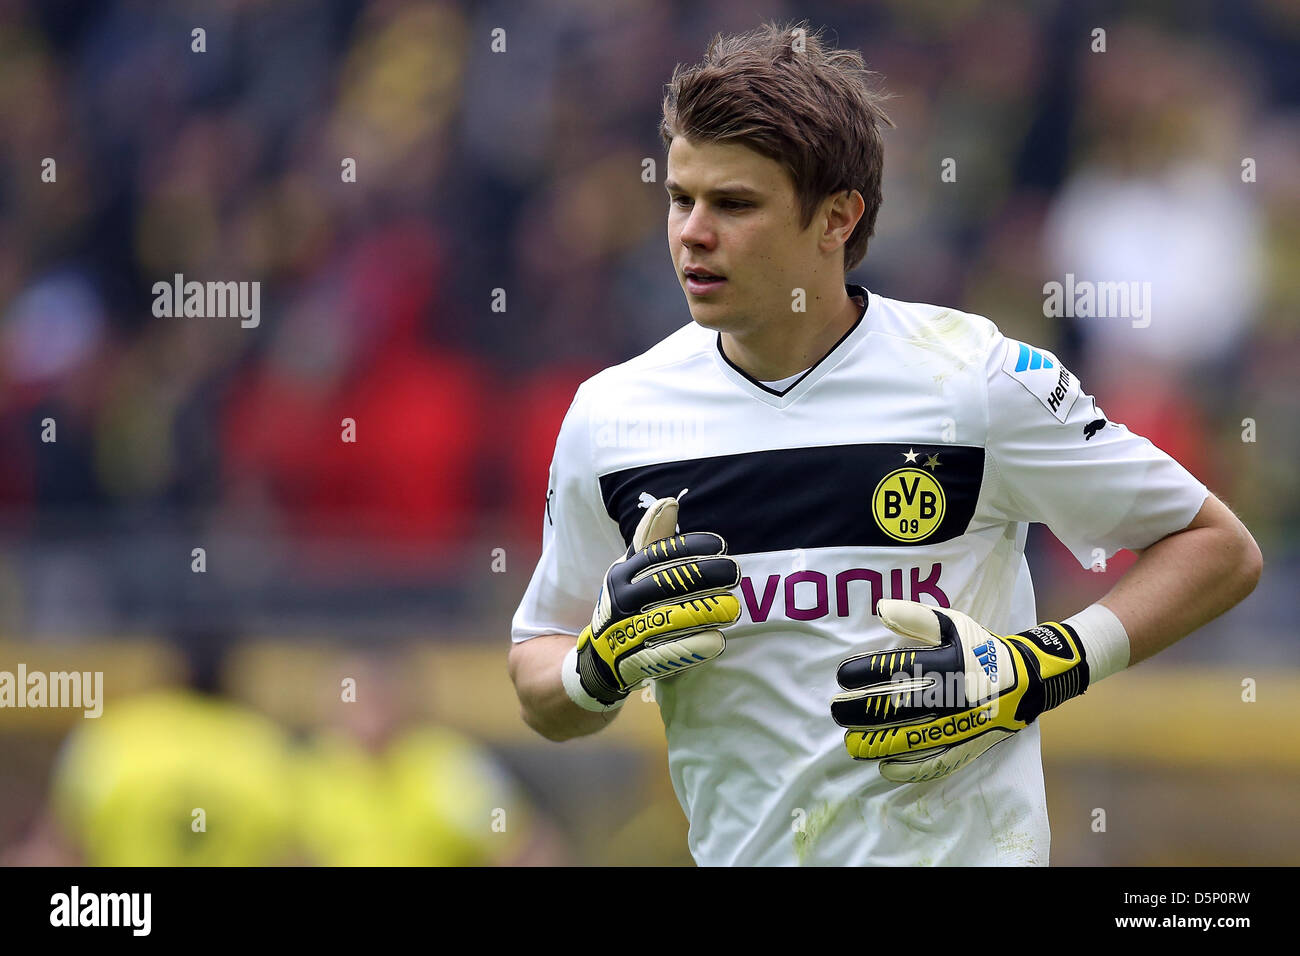 Dortmund's goalkeeper Mitchell Langerak runs onto the field before the Bundesliga soccer match between Borussia Dortmund and FC Augsburg at Iduna Park in Dortmund, Germany, 06 April 2013. Photo: KEVIN KUREK   (ATTENTION: EMBARGO CONDITIONS! The DFL permits the further  utilisation of up to 15 pictures only (no sequntial pictures or video-similar series of pictures allowed) via the internet and online media during the match (including halftime), taken from inside the stadium and/or prior to the start of the match. The DFL permits the unrestricted transmission of digitised recordings during the  Stock Photo